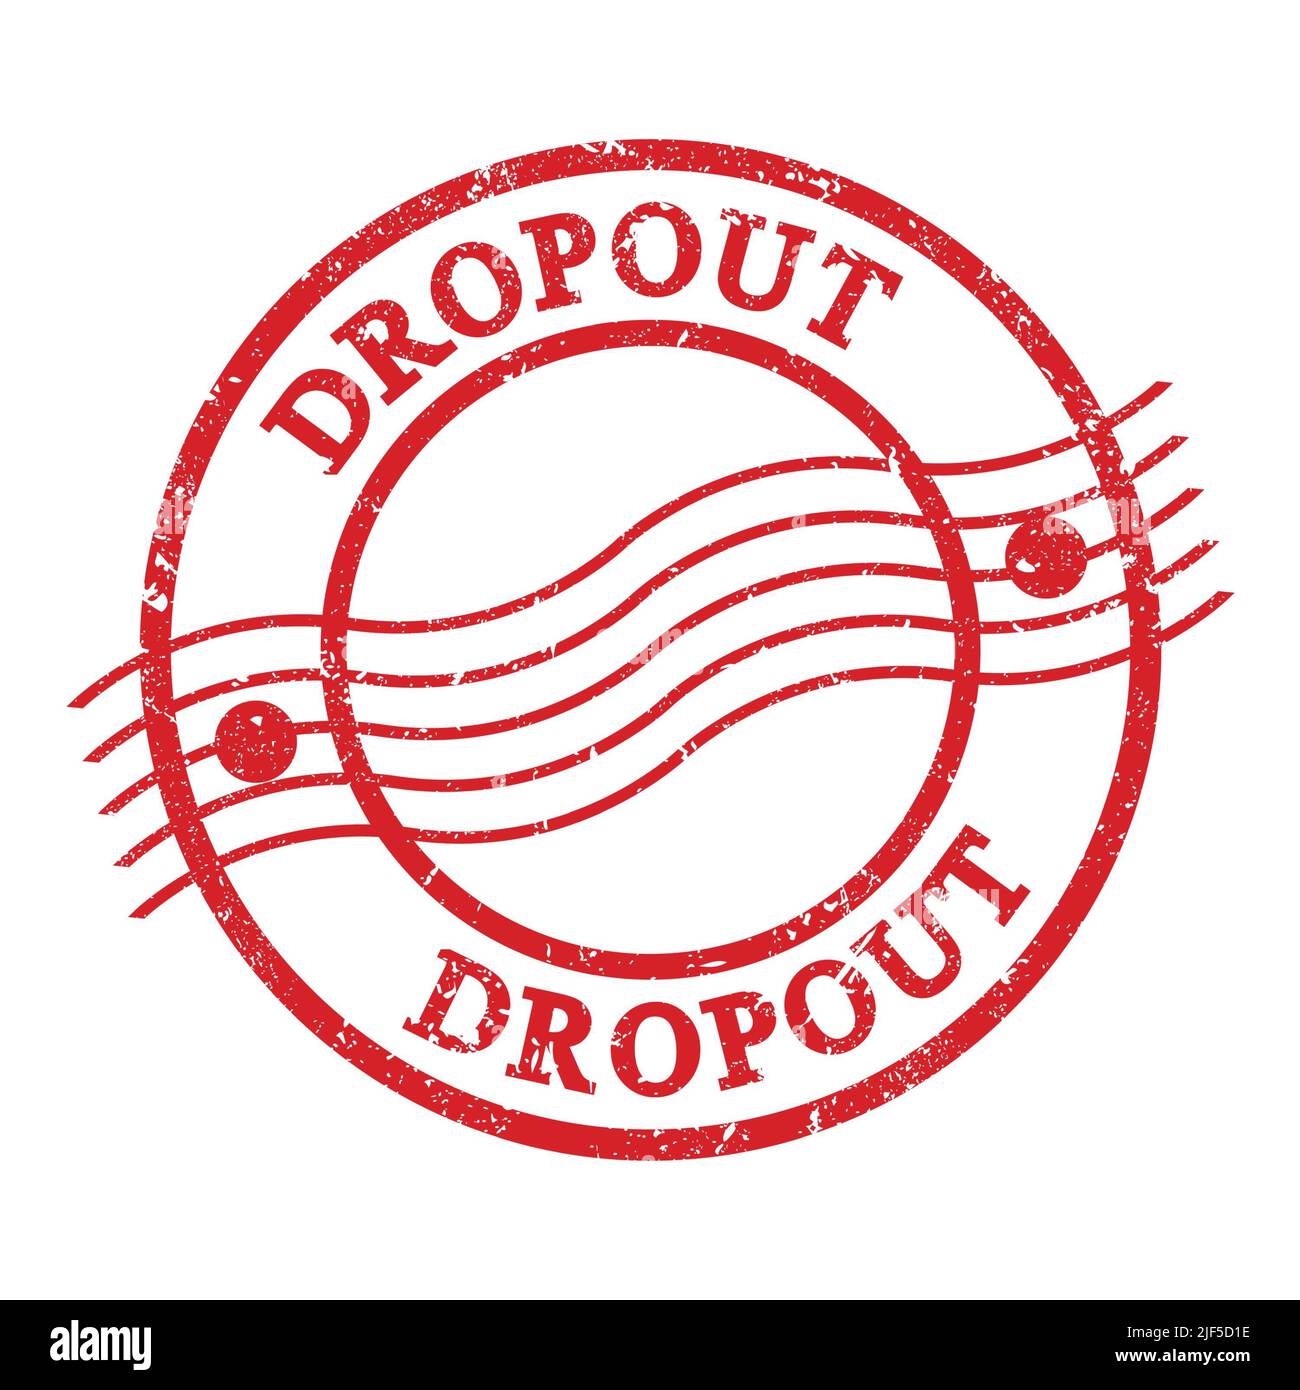 DROPOUT, text written on red grungy postal stamp. Stock Photo